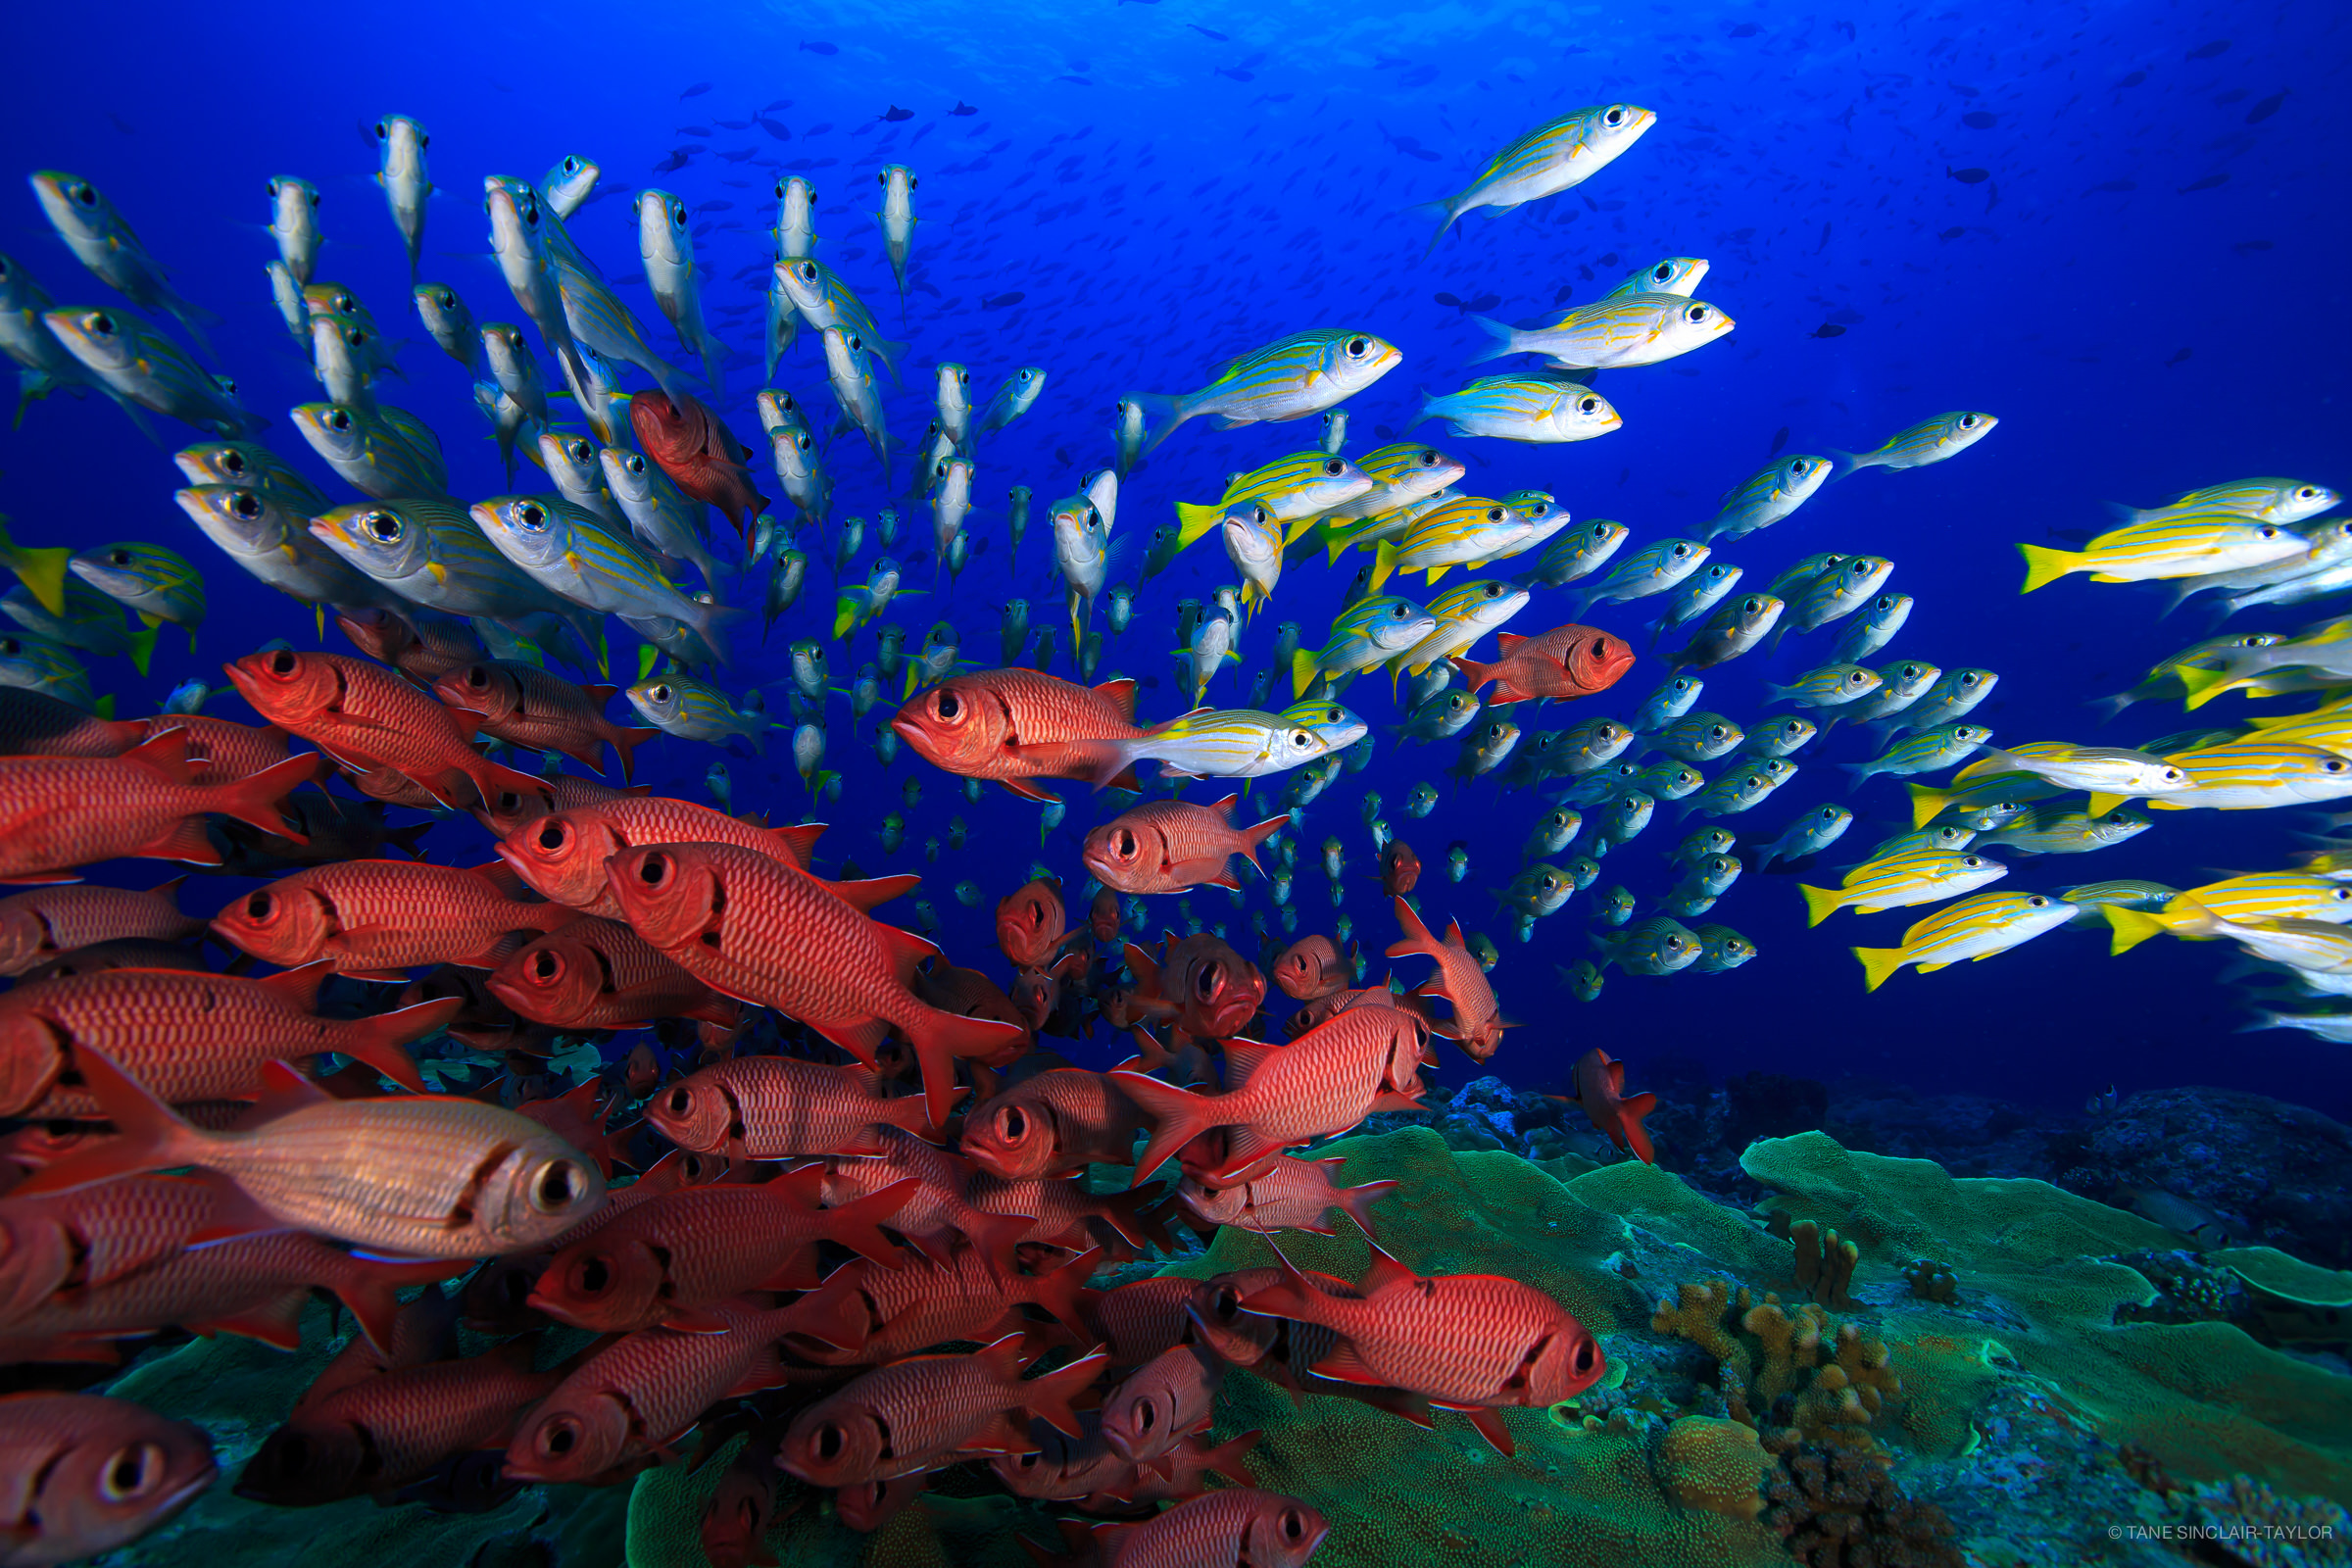 Colorful fish on a healthy reef with bright blue ocean water in the background.